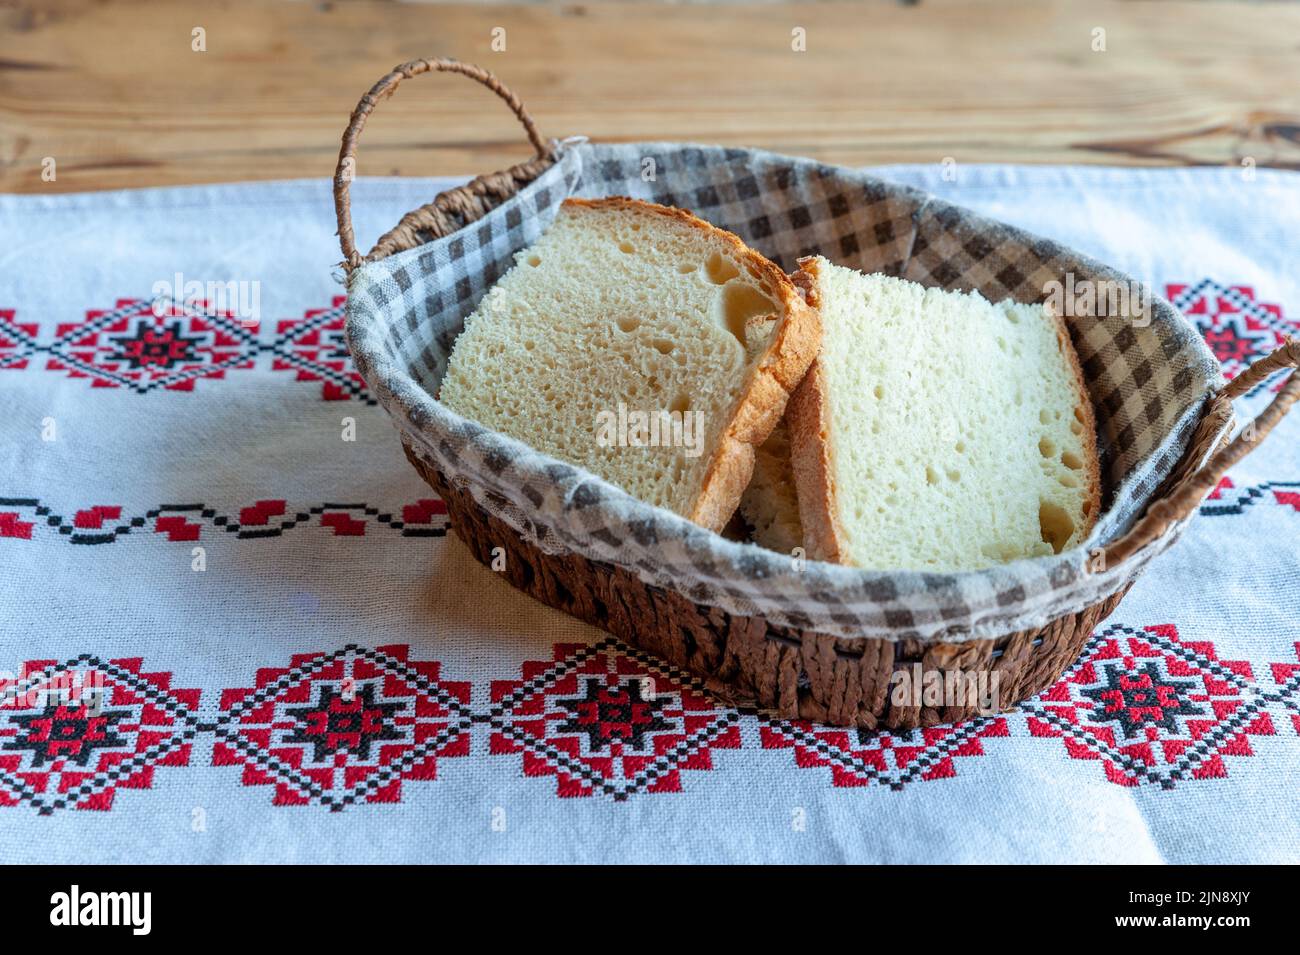 sliced bread in basket on a table cloth Stock Photo